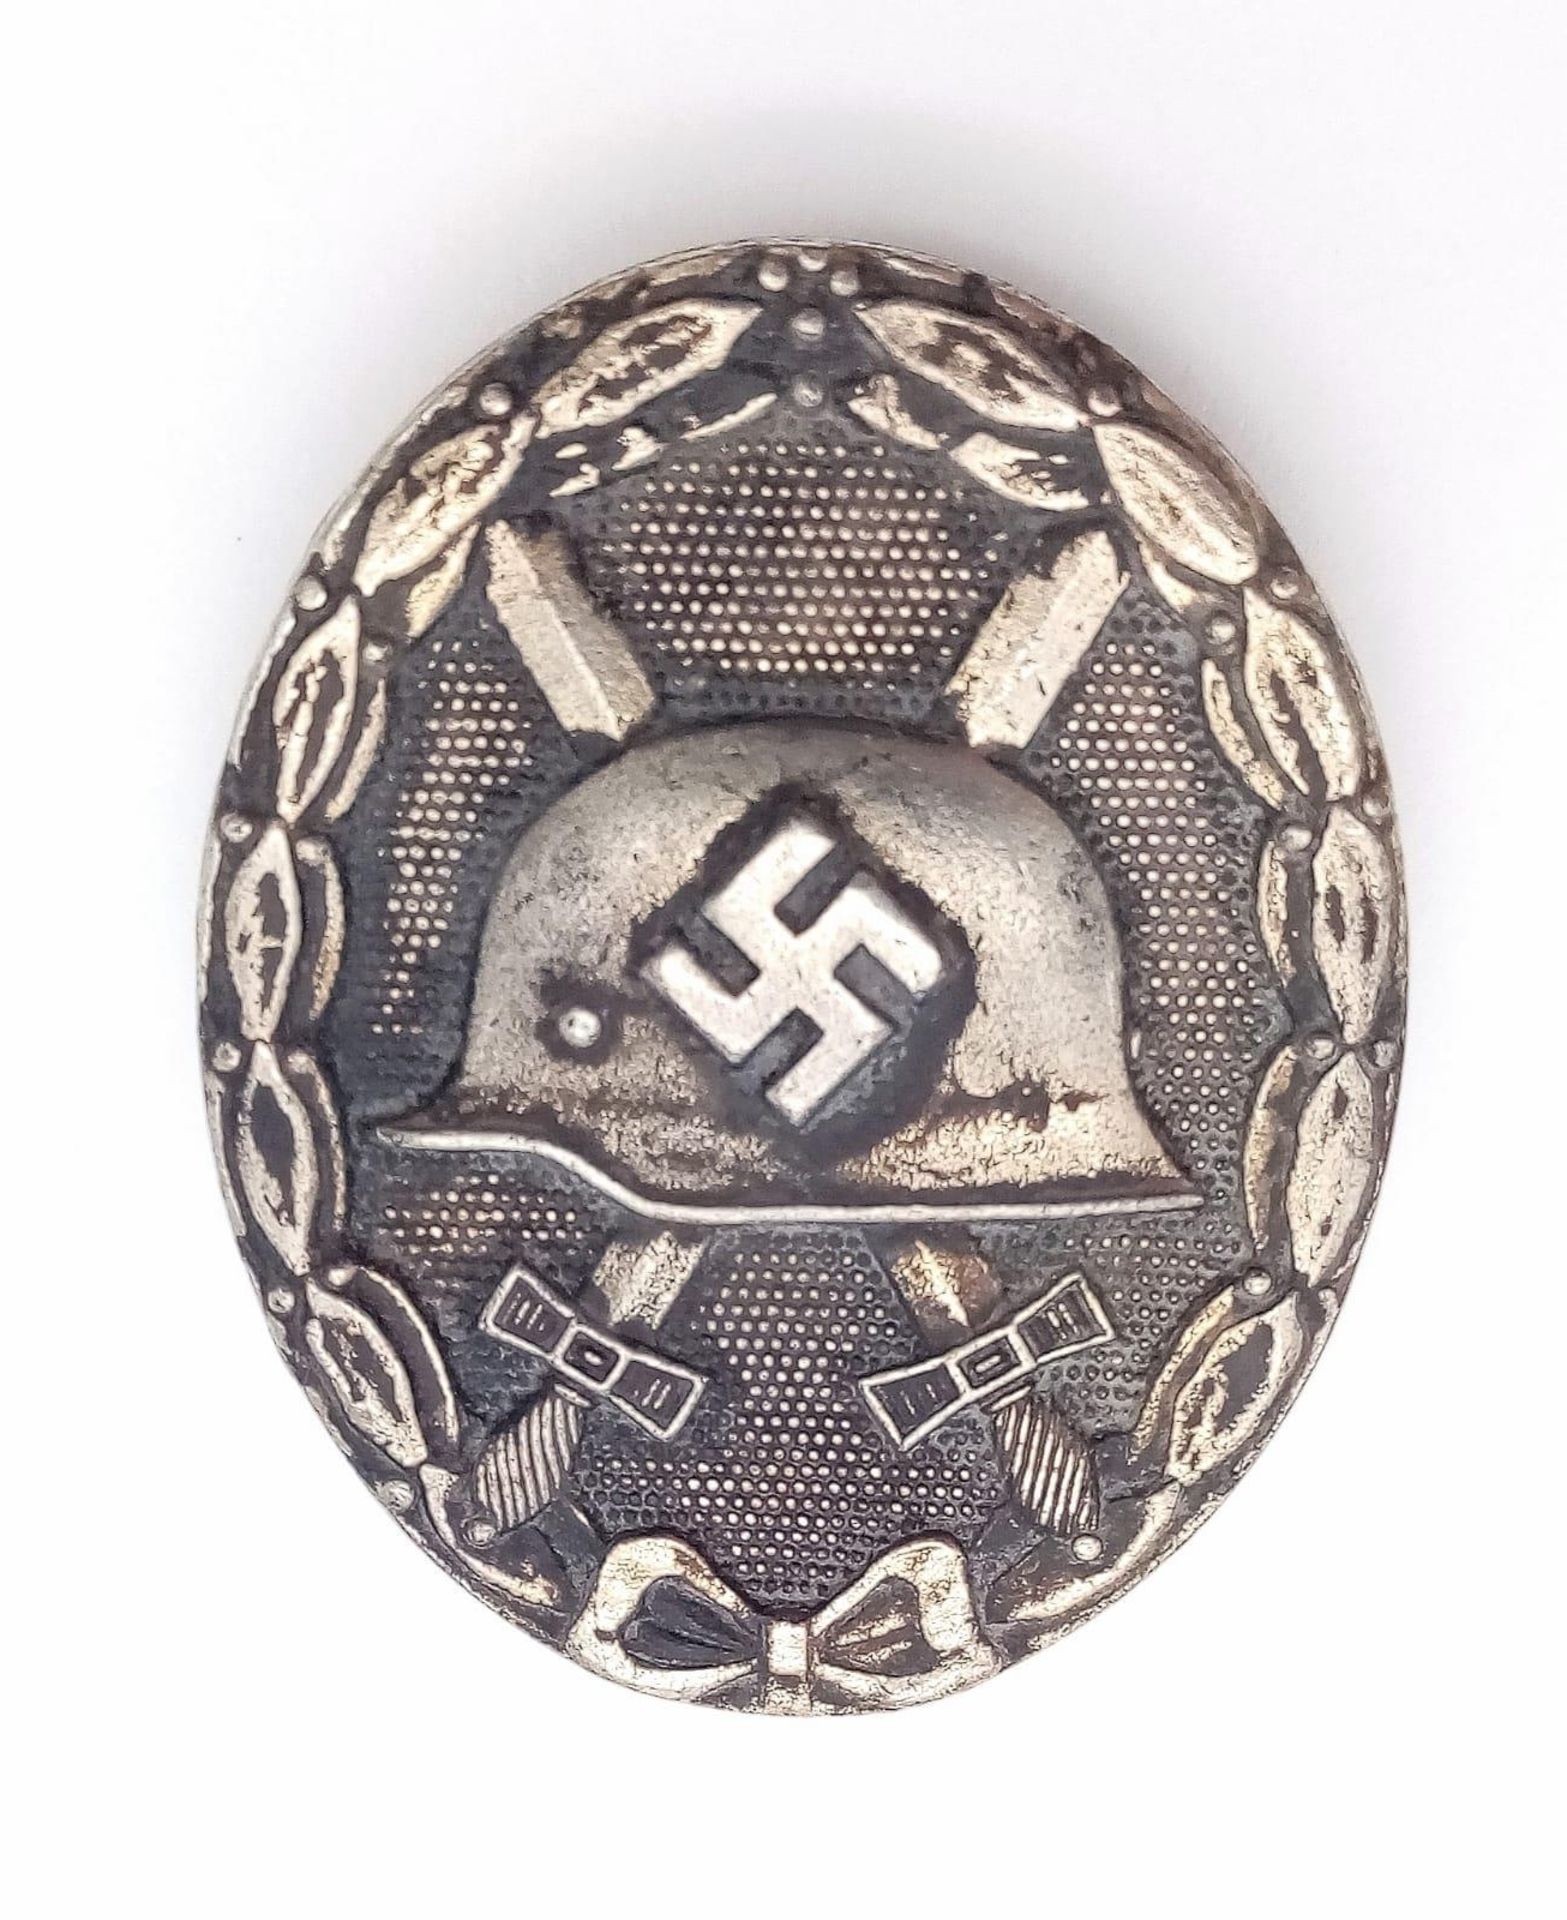 WW2 German Silver 2nd Class Wound Badge, for Maker marker L/55 for the maker J.E. Hammer & Sohne.